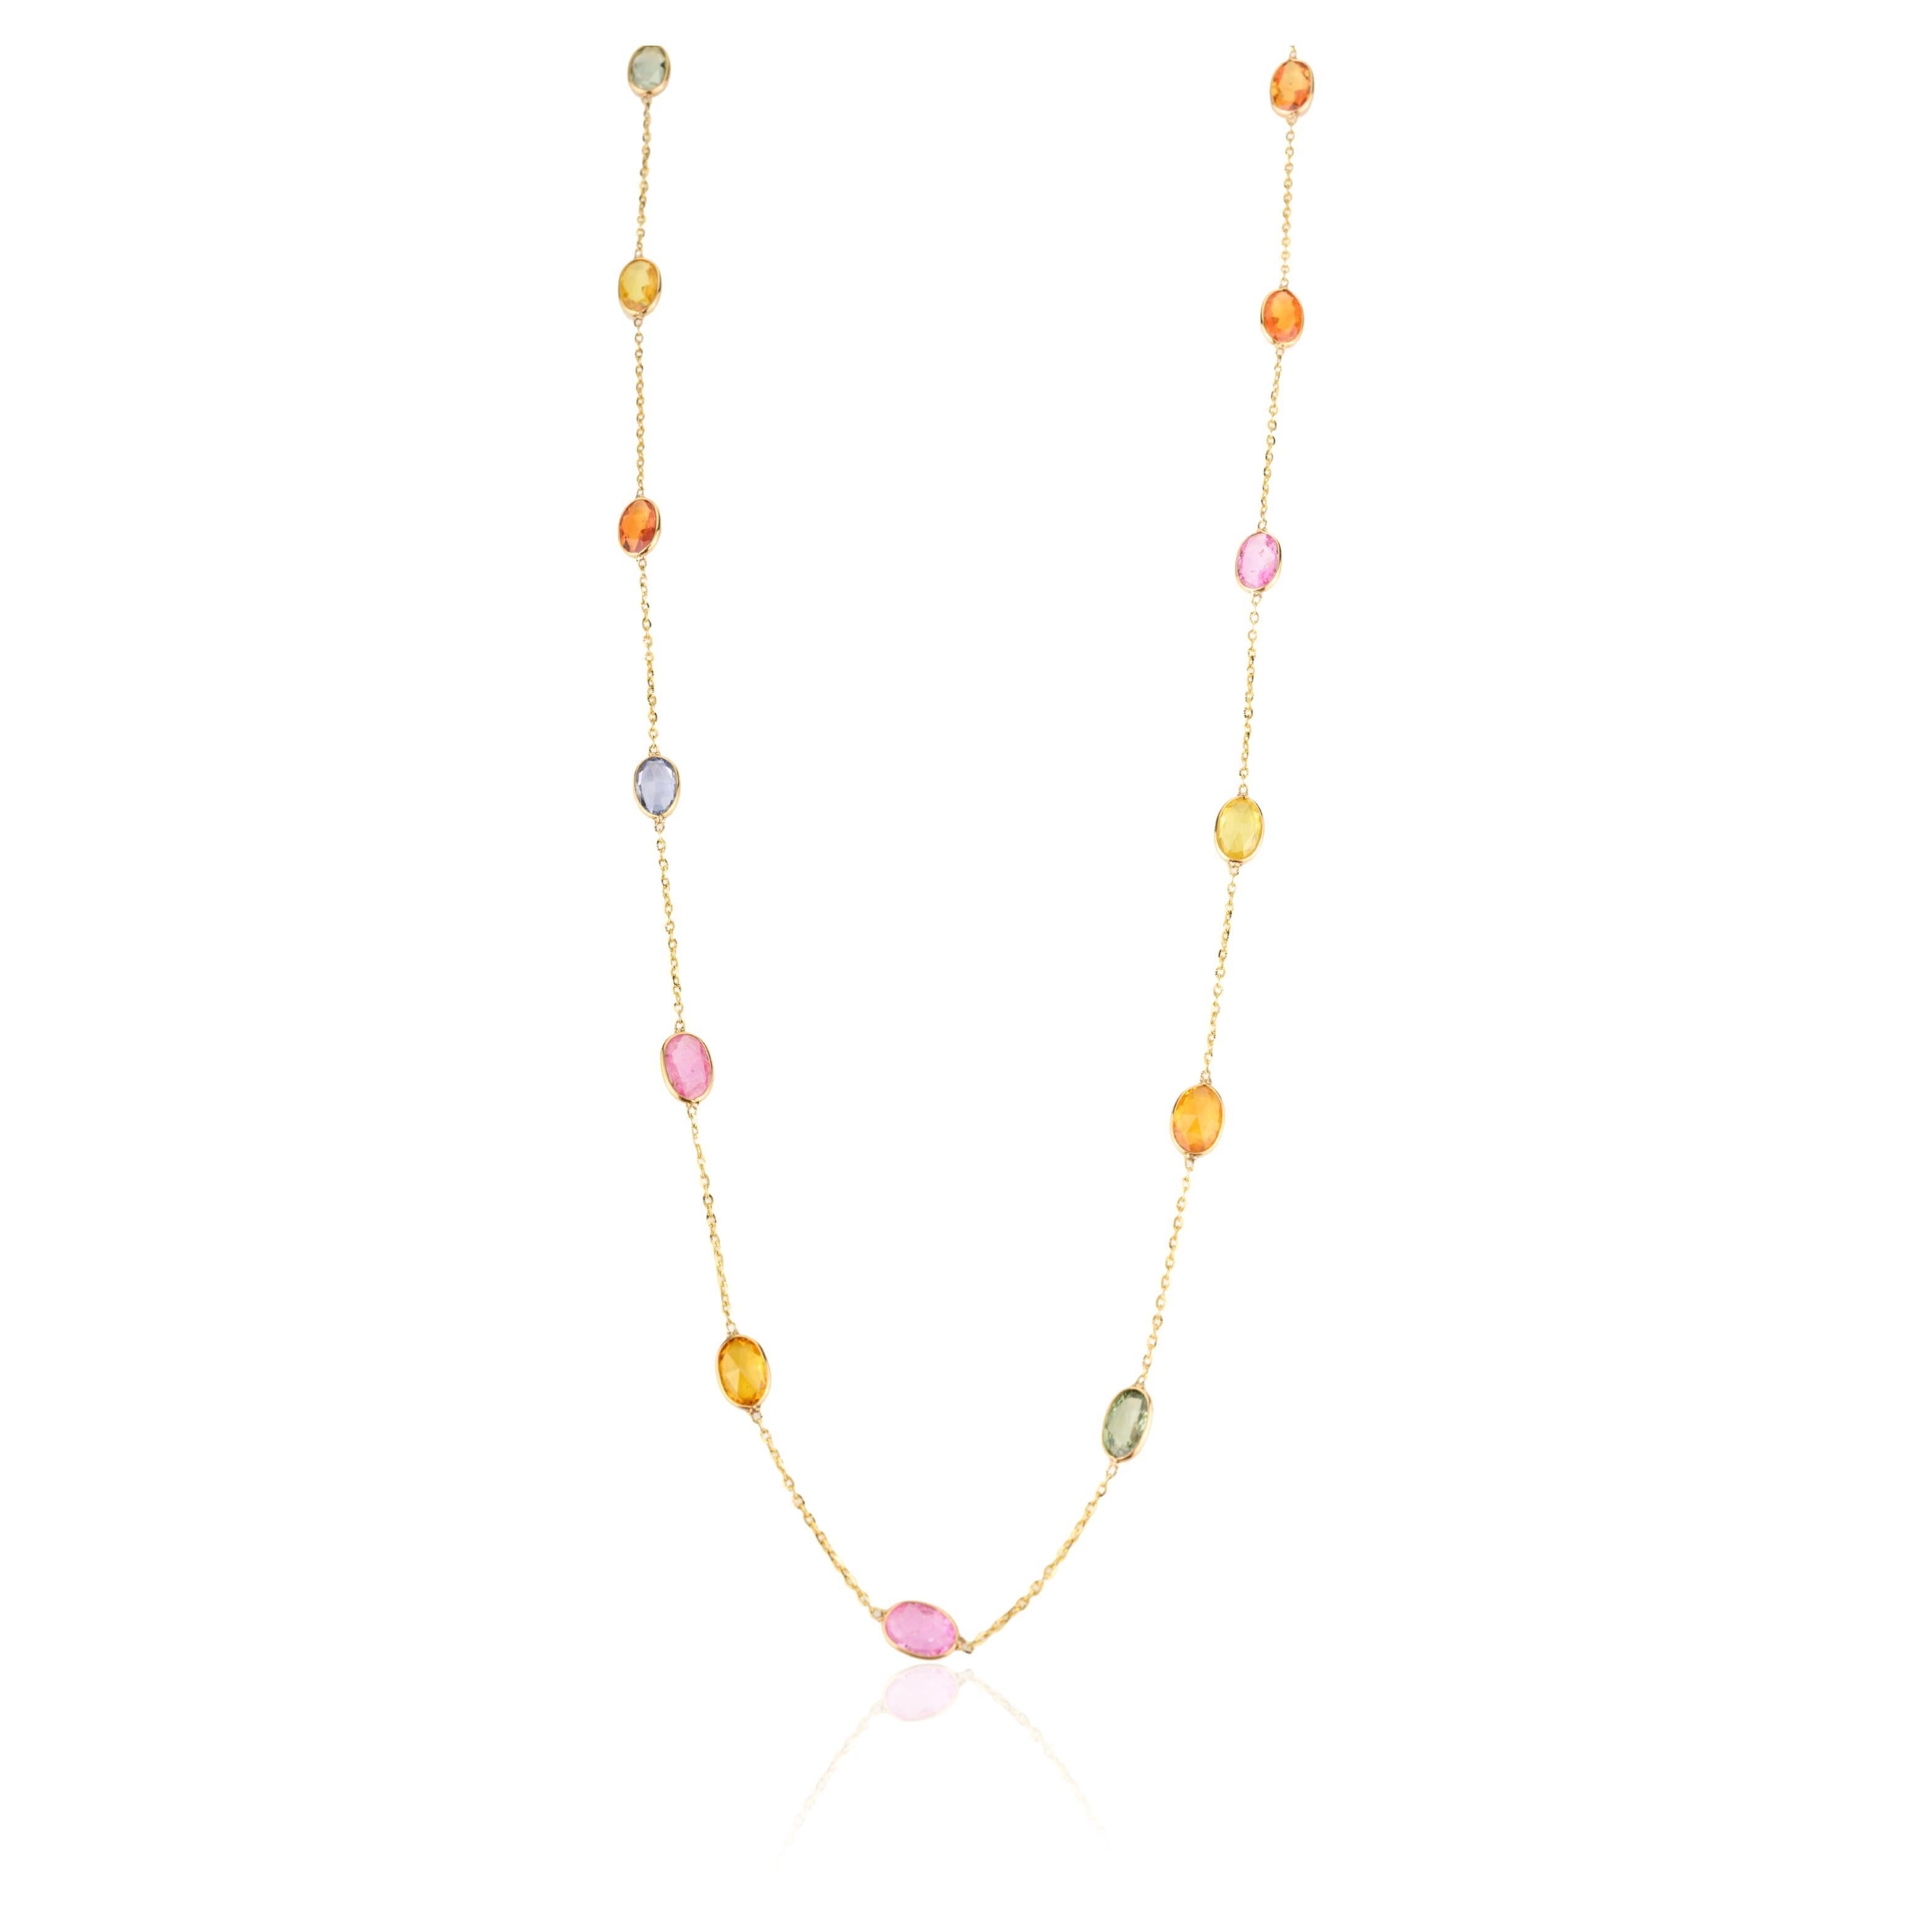 Certified Multi Sapphire Station Chain Necklace for Women in 18k Yellow Gold